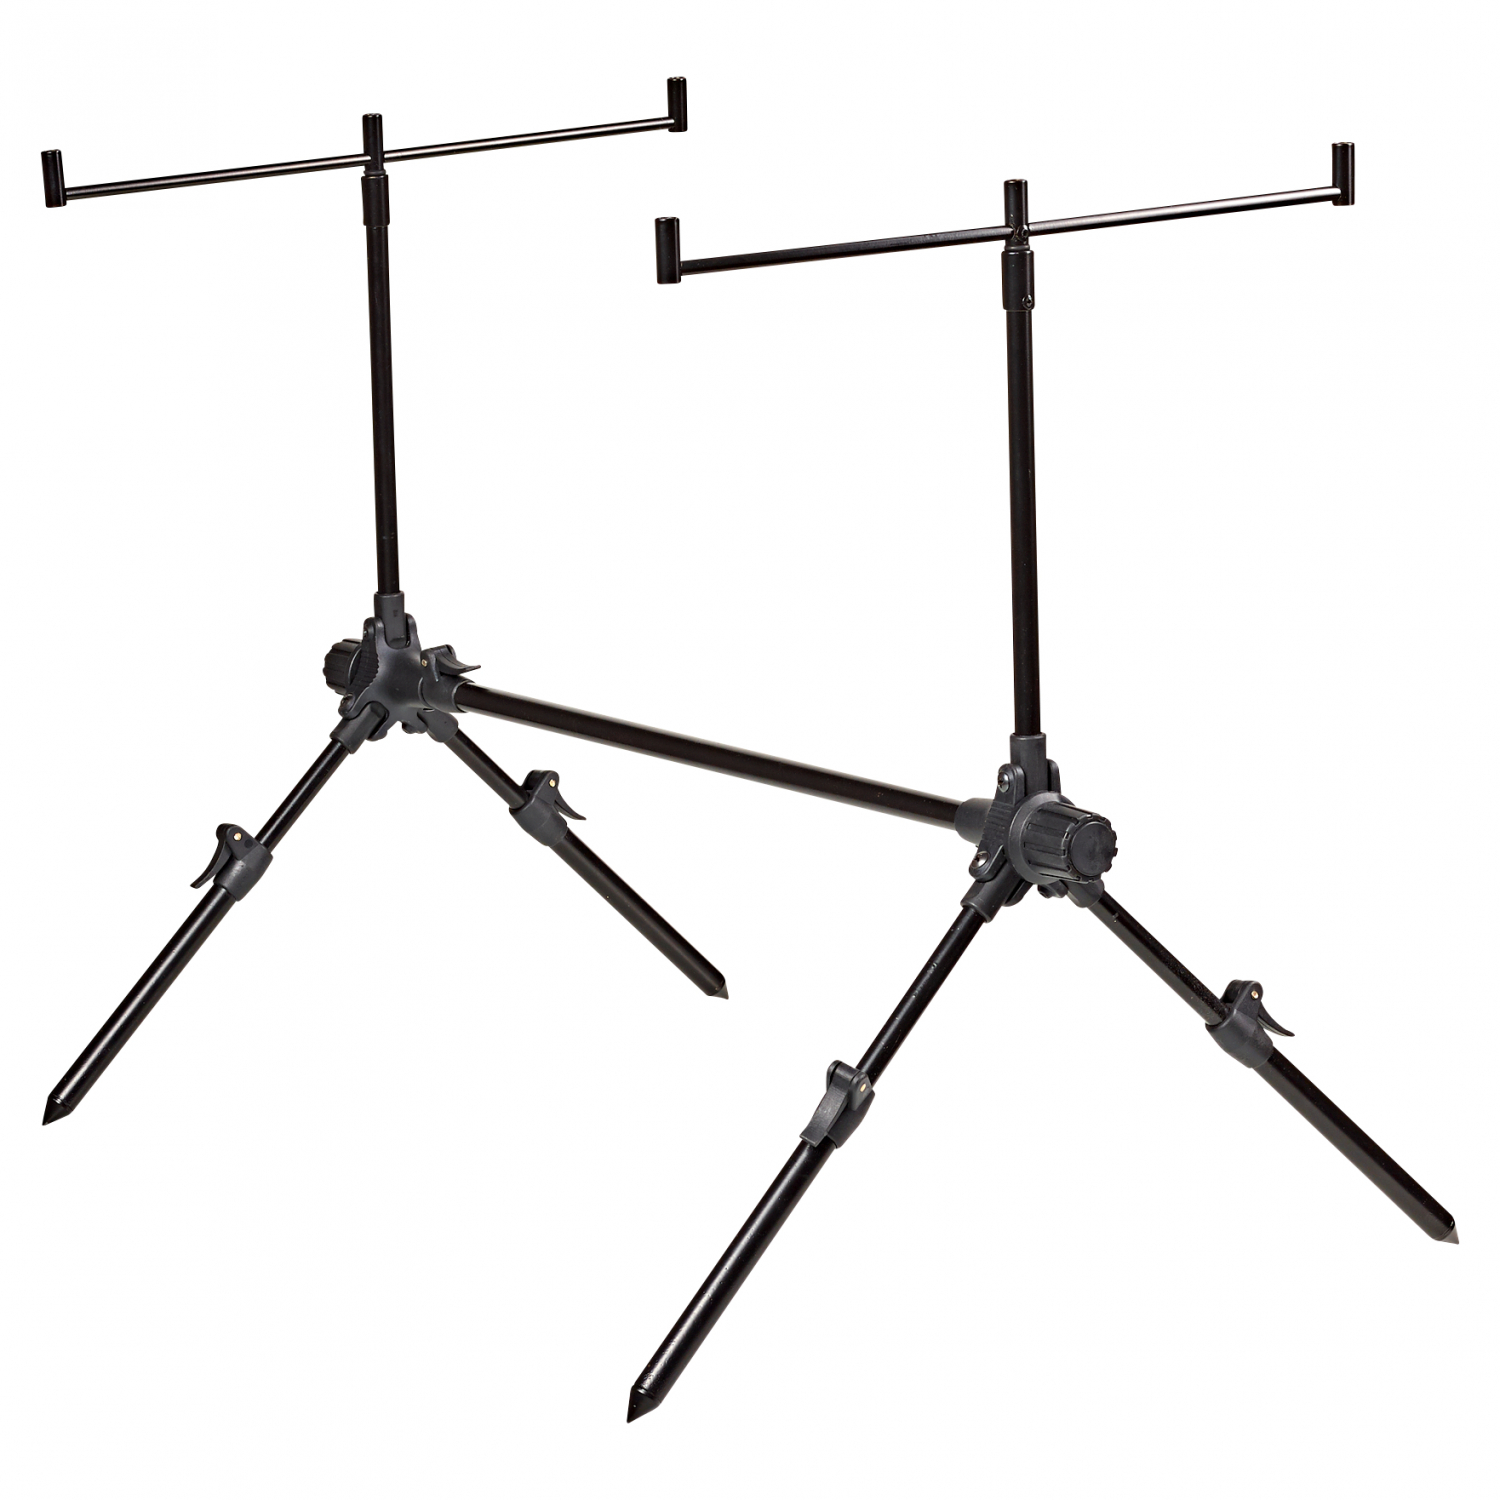 Kogha Universal Rod Stand at low prices